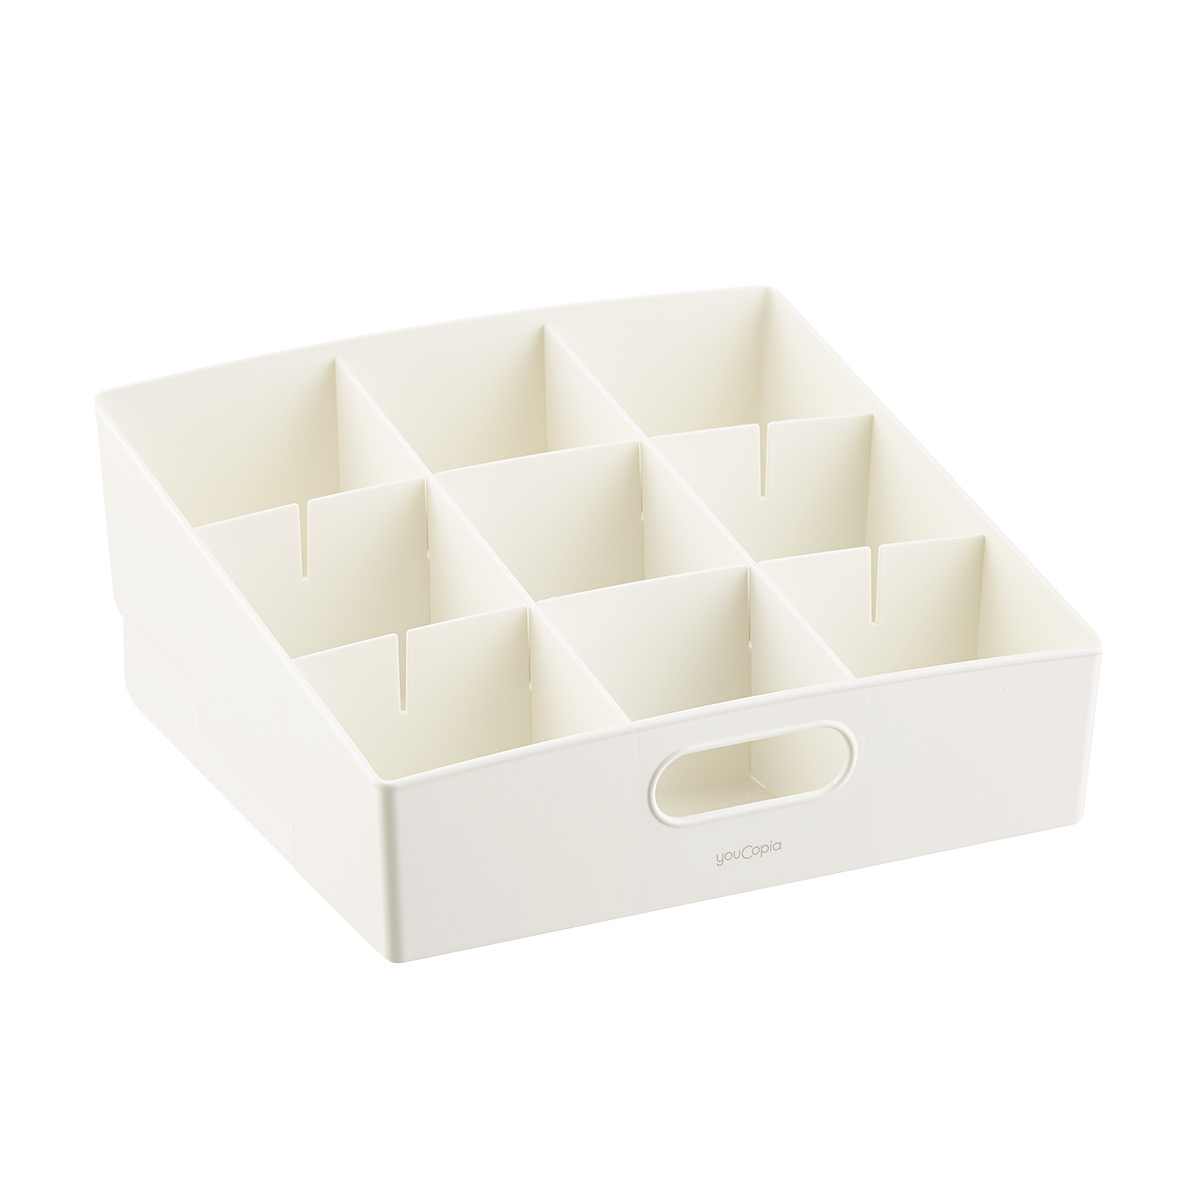 https://www.containerstore.com/catalogimages/393514/10082706-youCopia-3-tier-divided-bin.jpg